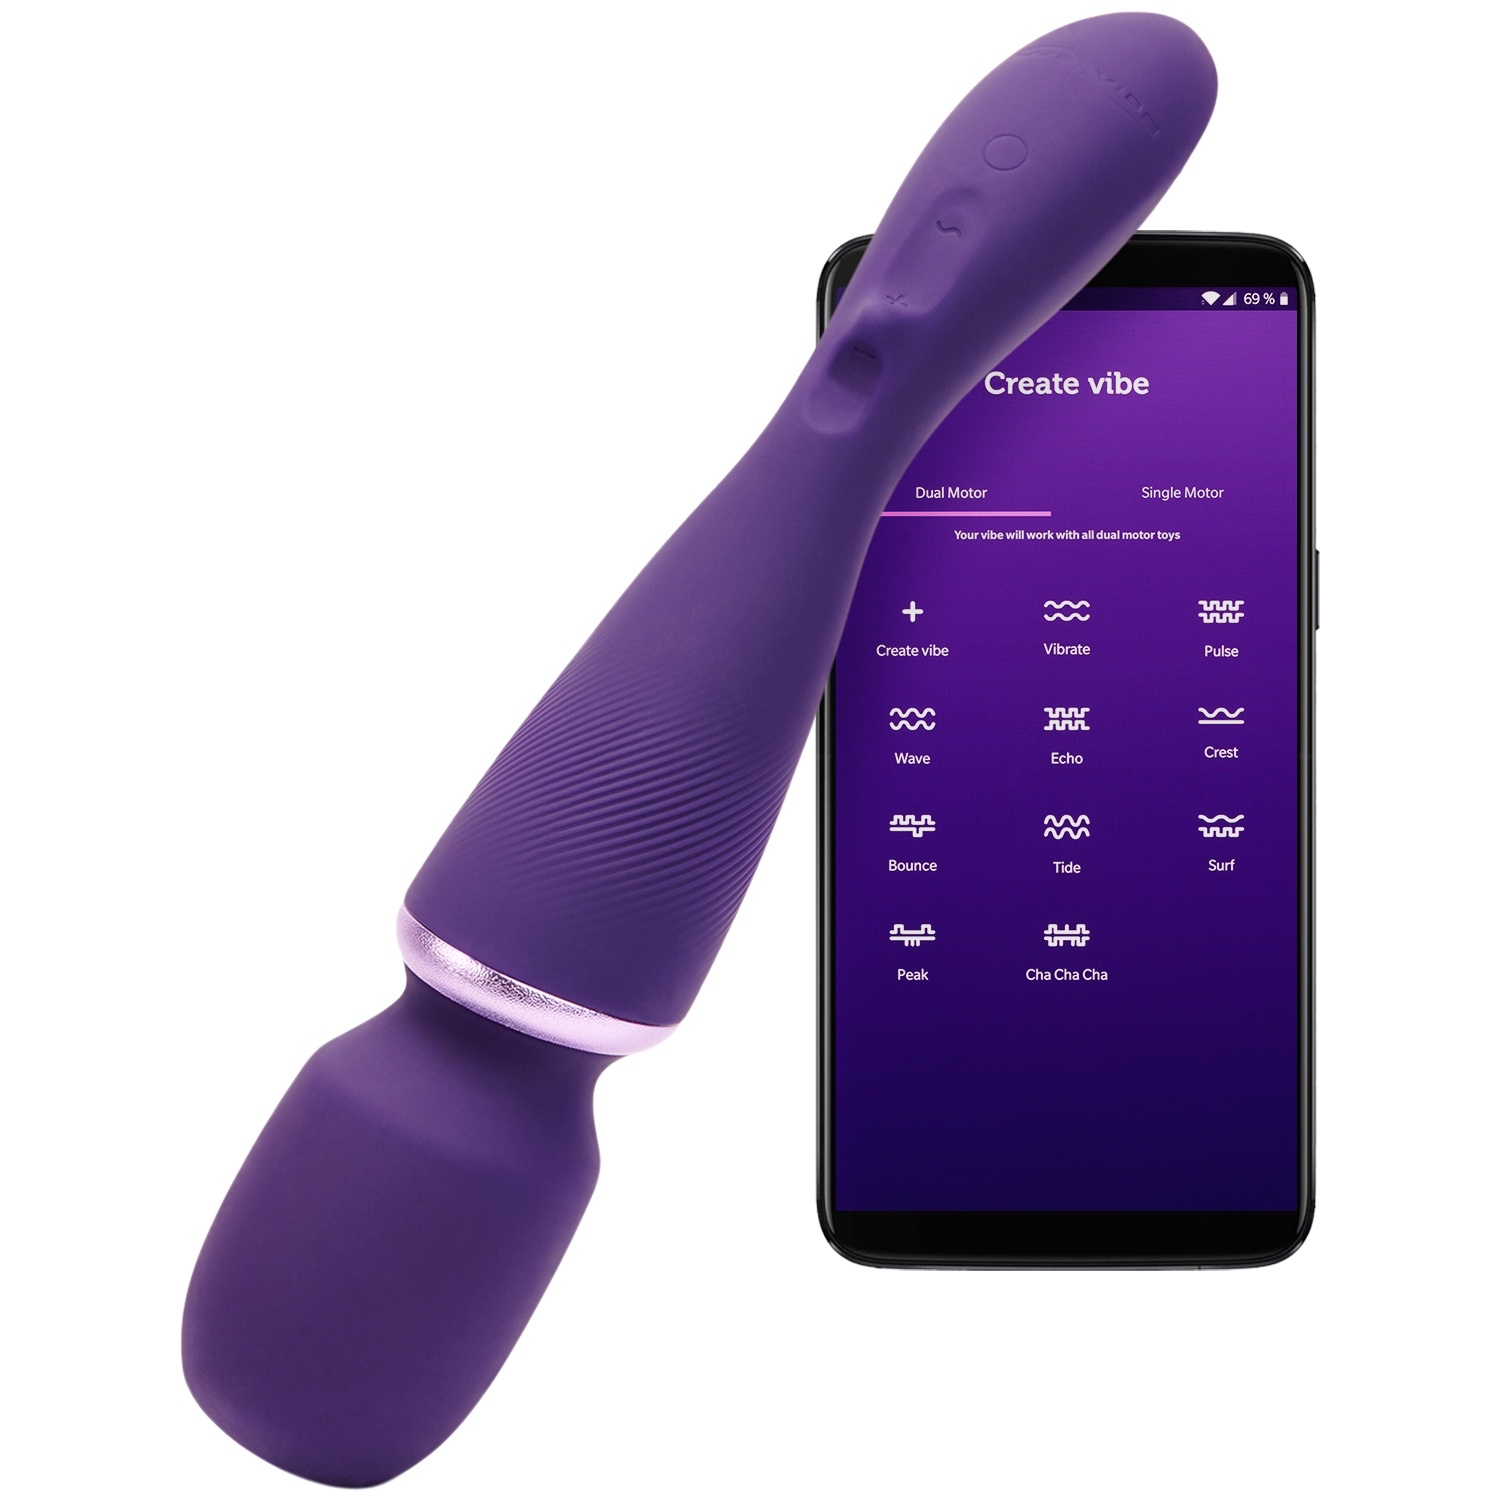 We-Vibe Wand Review - Is this the Best Wand Vibrator